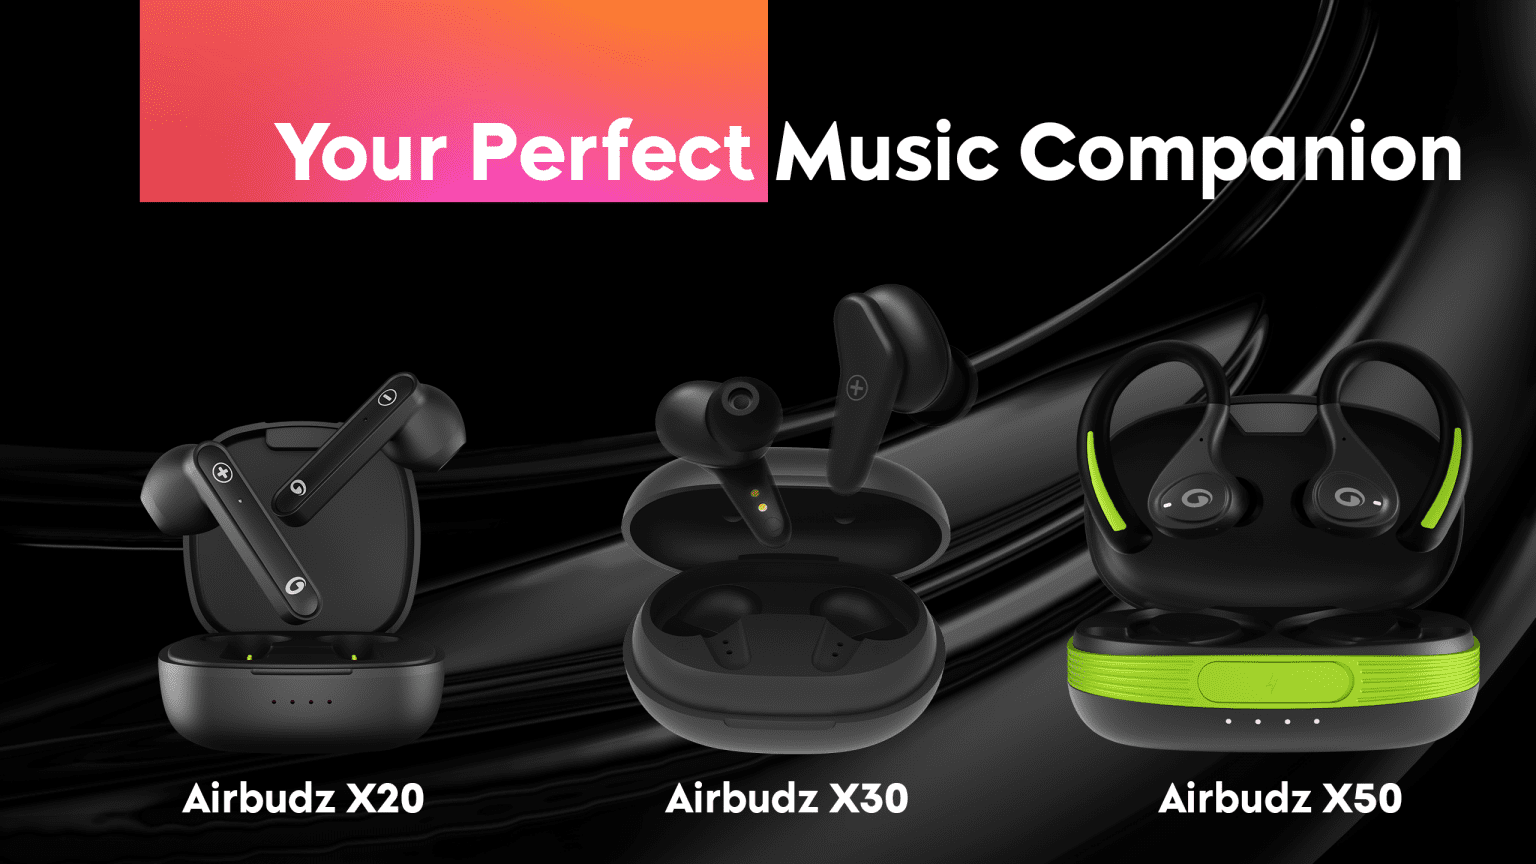 Meet your perfect music companion with Amkette Air budz